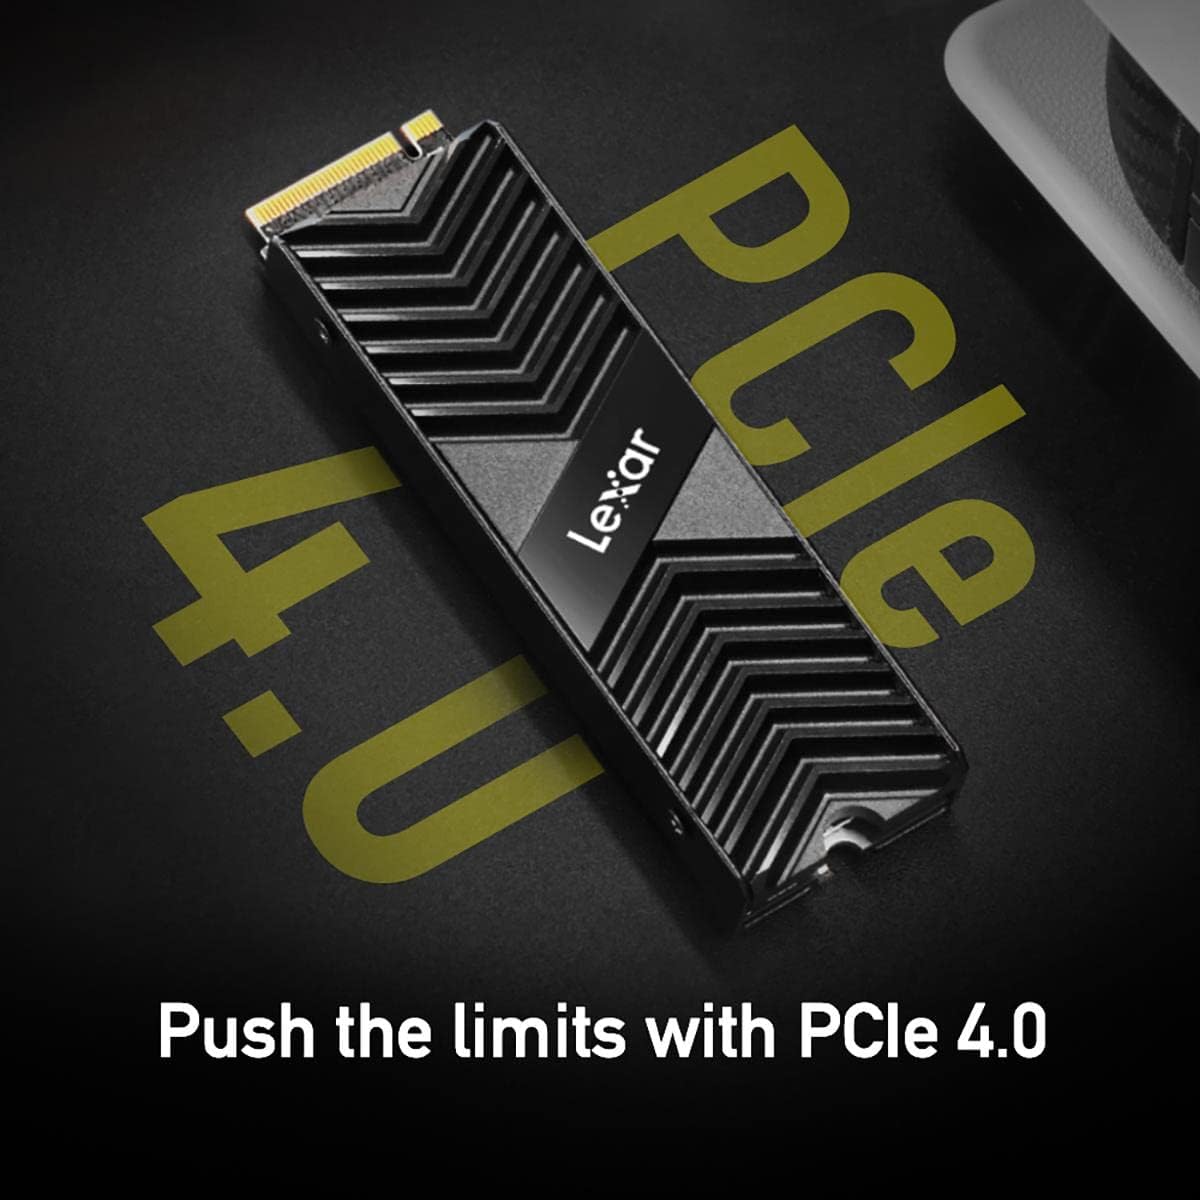 1TB Pro High Speed PCle Gen4 with 4 Lanes M.2 NvMe, Upto 7500Mb/s Read and 6300Mb/s Write